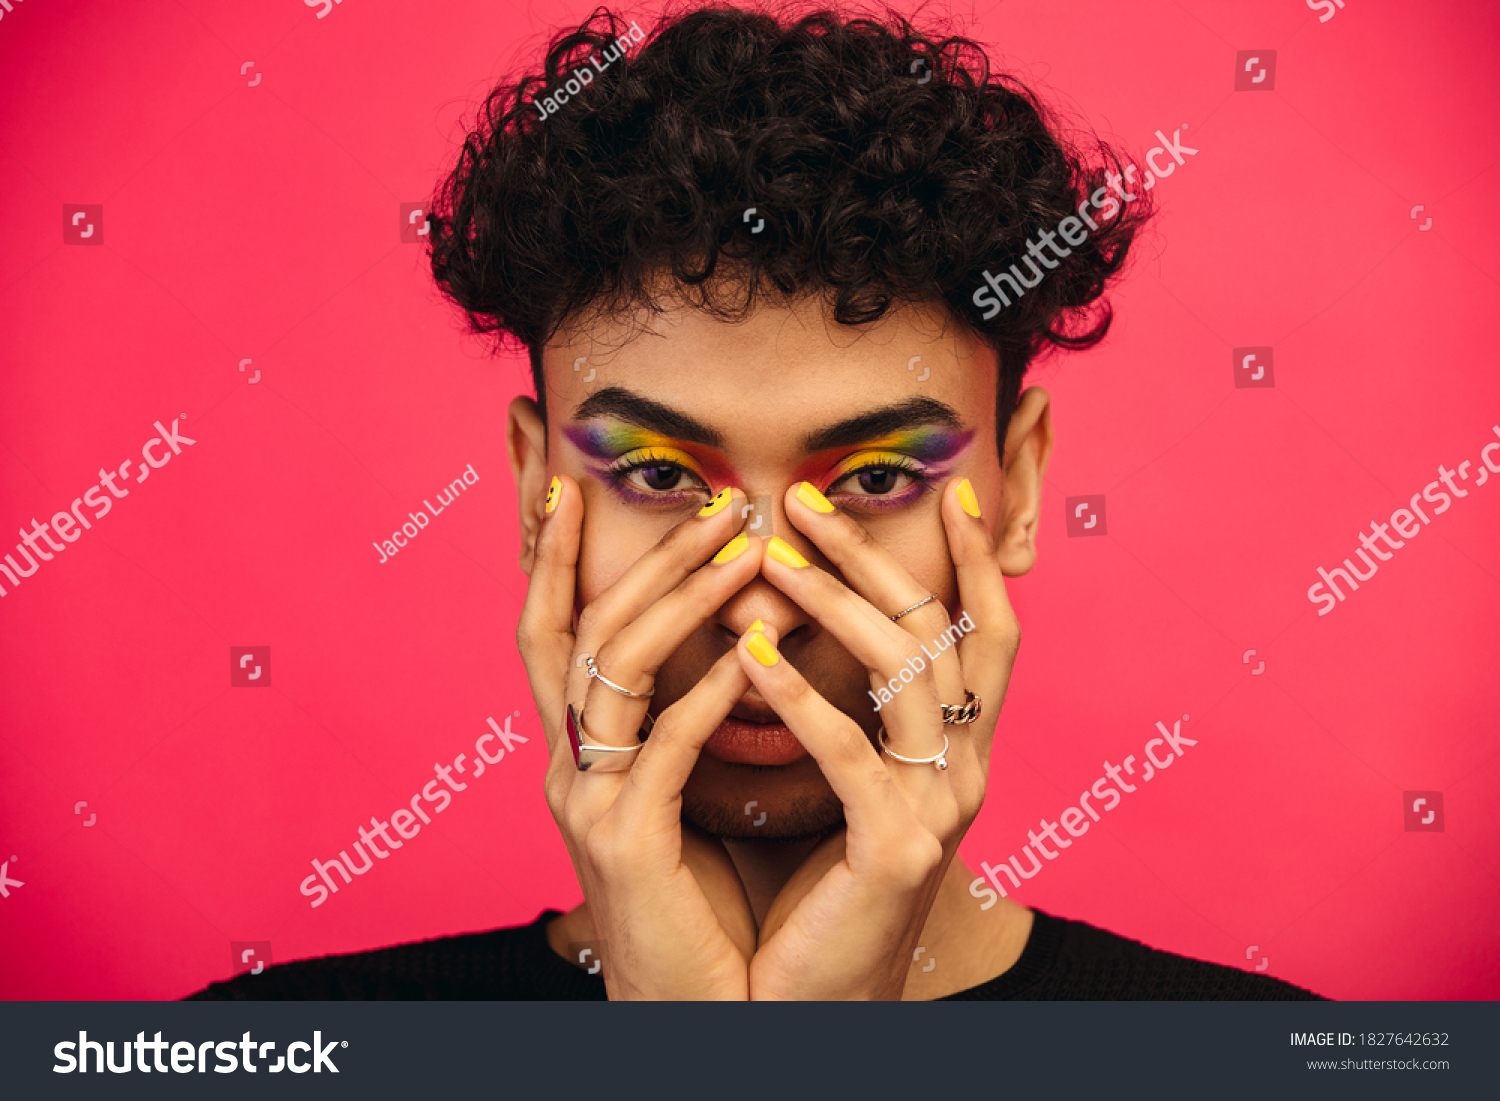 Gender fluid male wearing rainbow colored eye shadow and smiley face on fingernail. Transgender male with funky makeup on red background. #1827642632